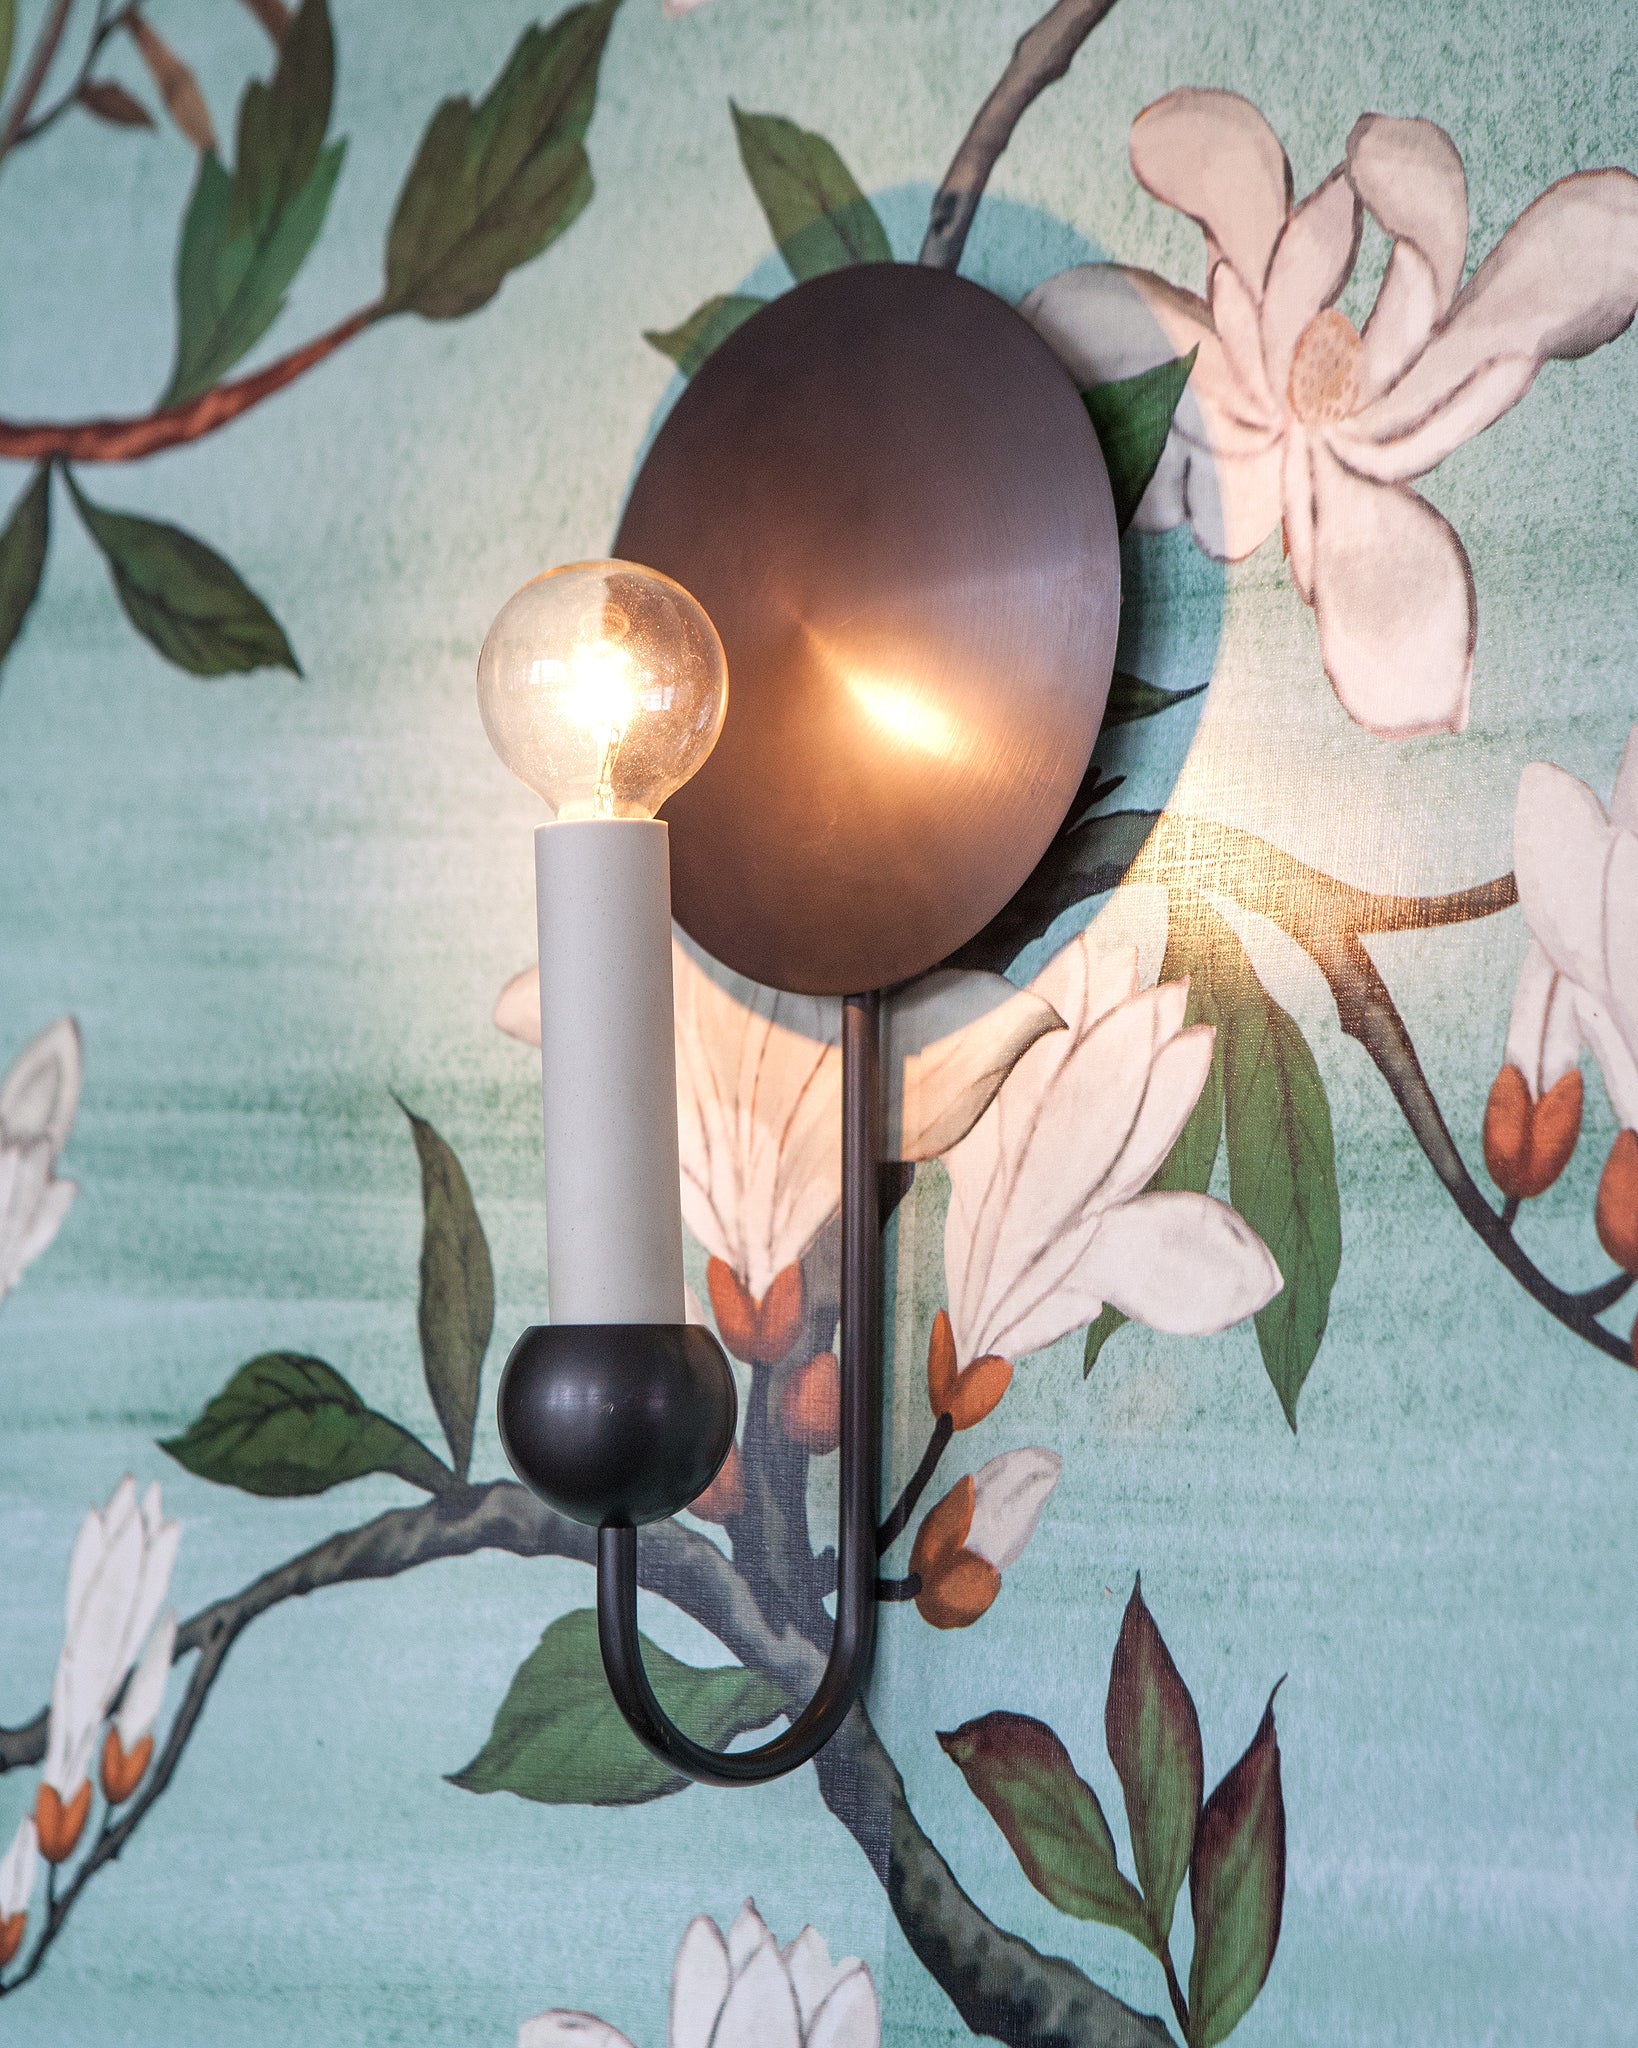 A wall sconce in antique brass with a gently domed backplate and spherical candle cup of solid brass is shown mounted and lit on a wall with pale blue wallpaper featuring magnolia blossoms.